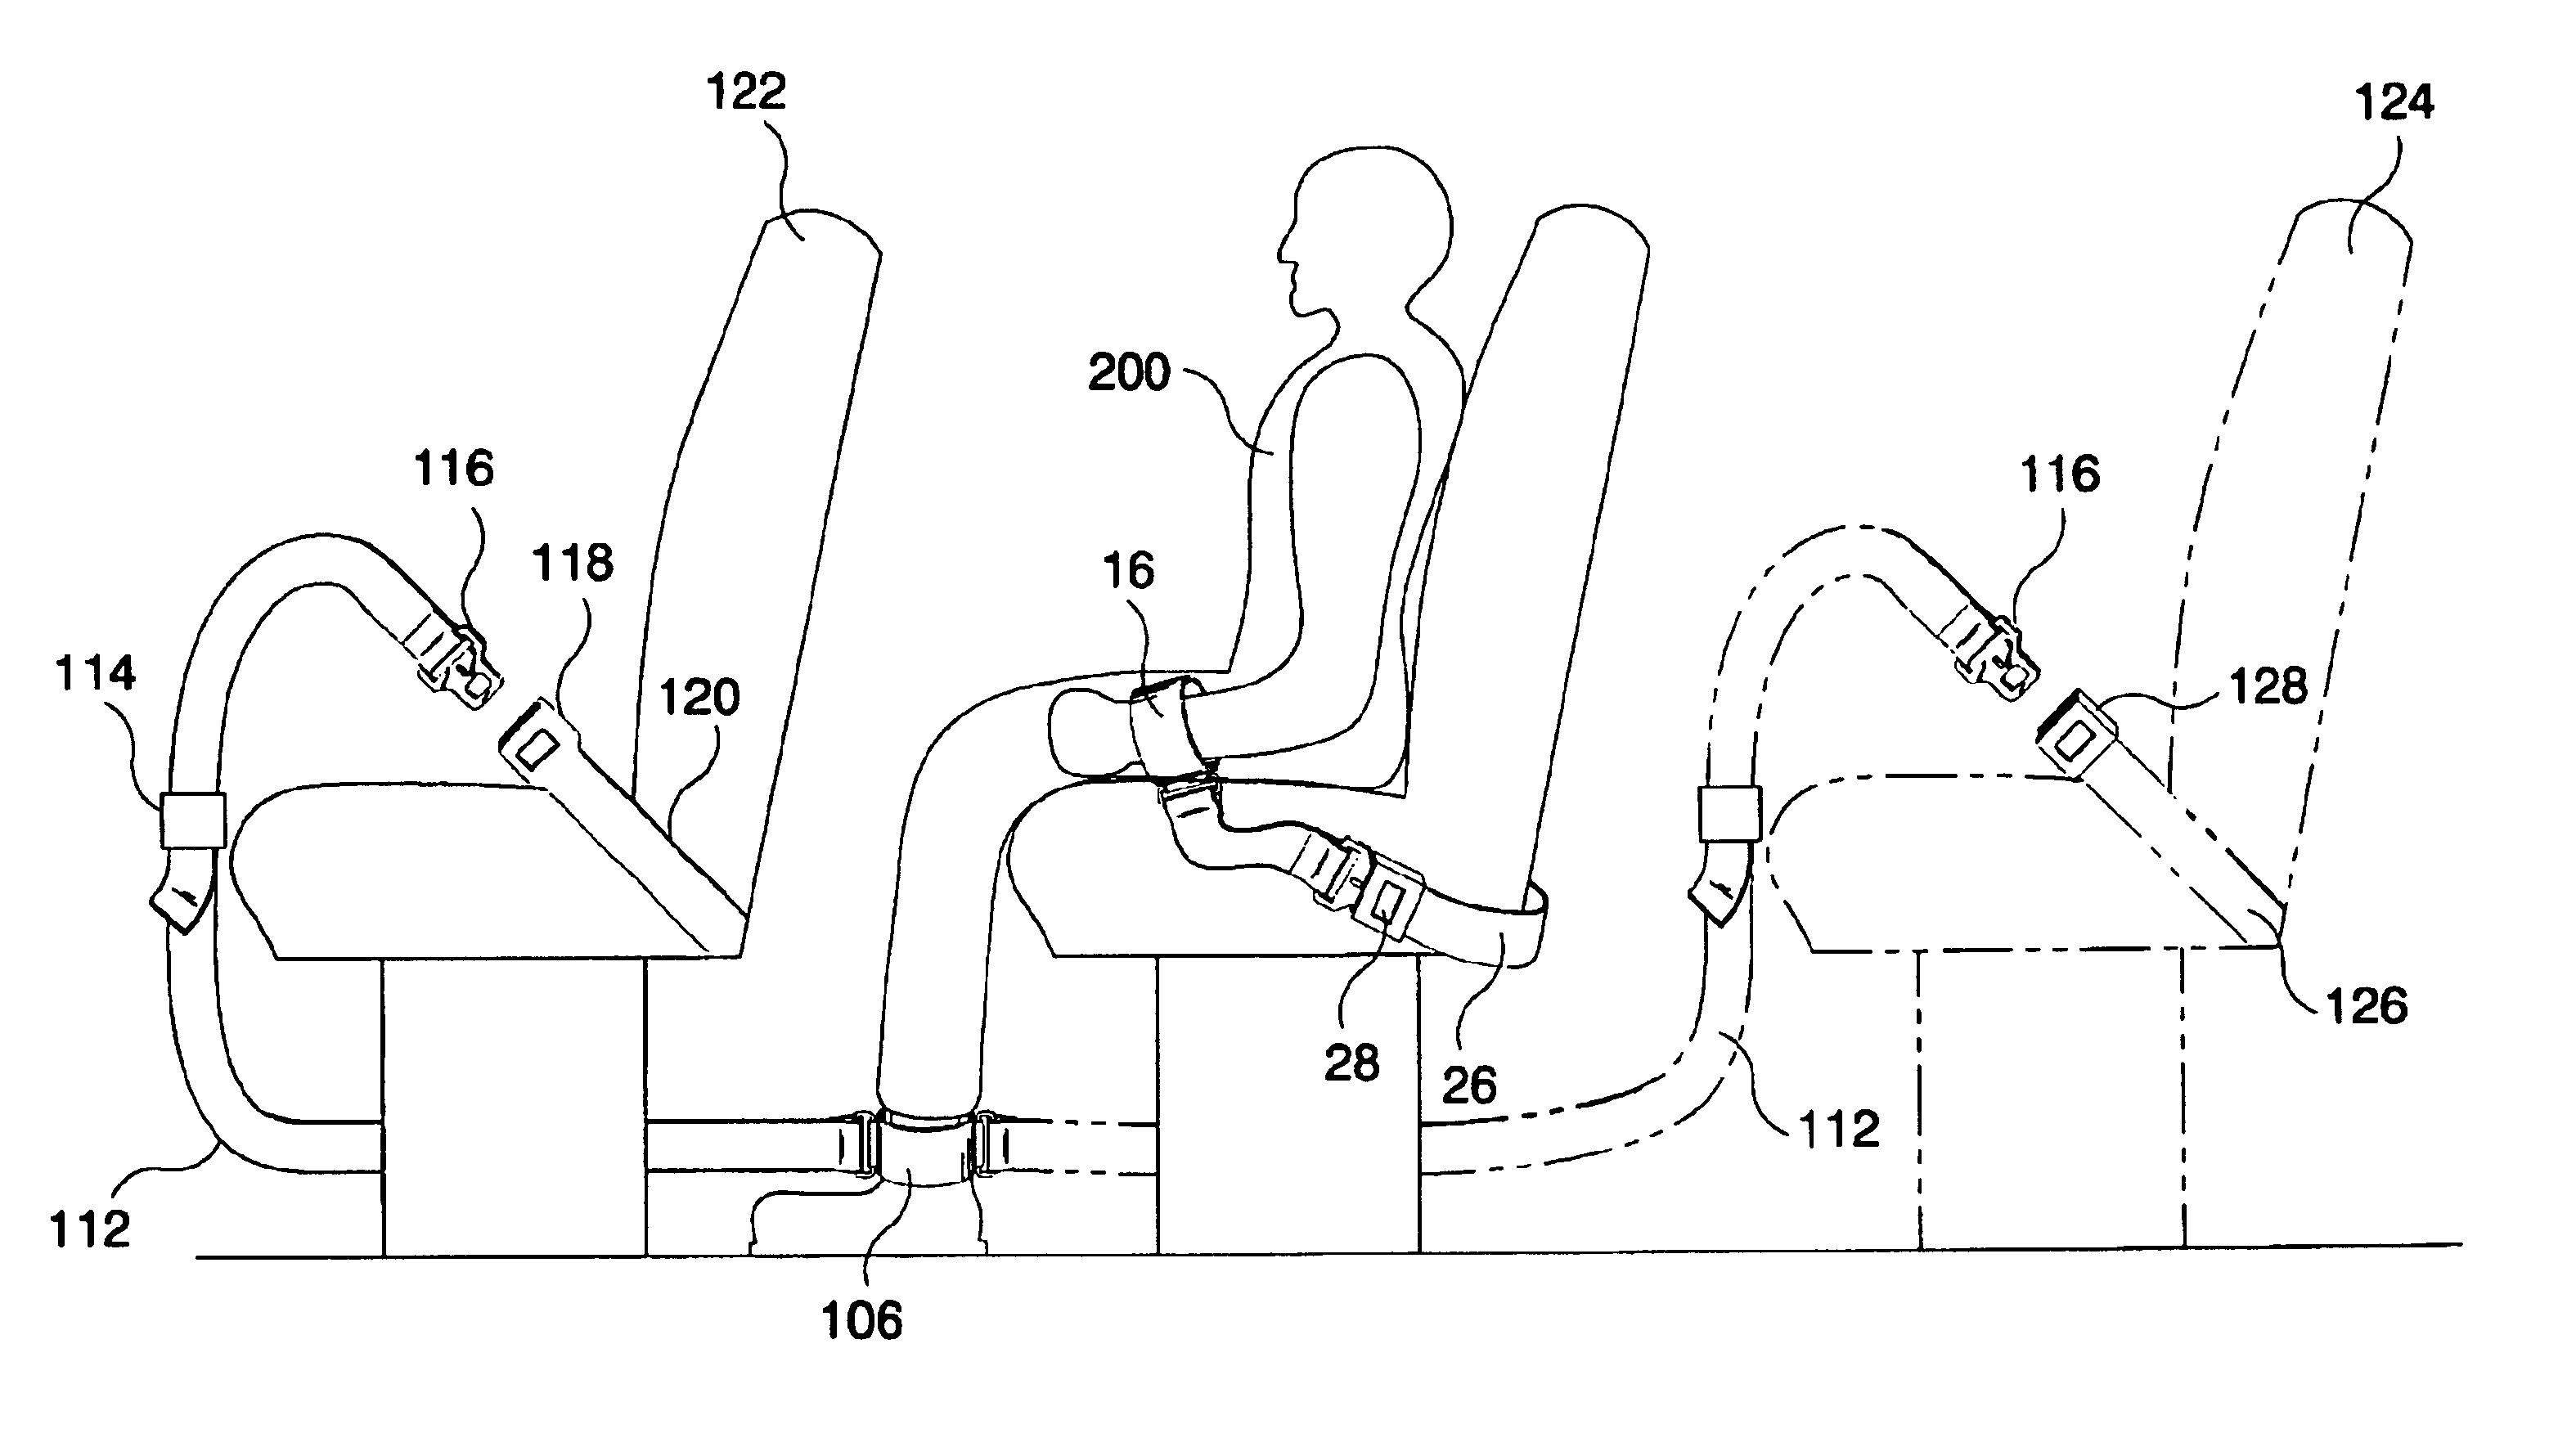 Rapid deployment seat-based releasable soft restraint system and method